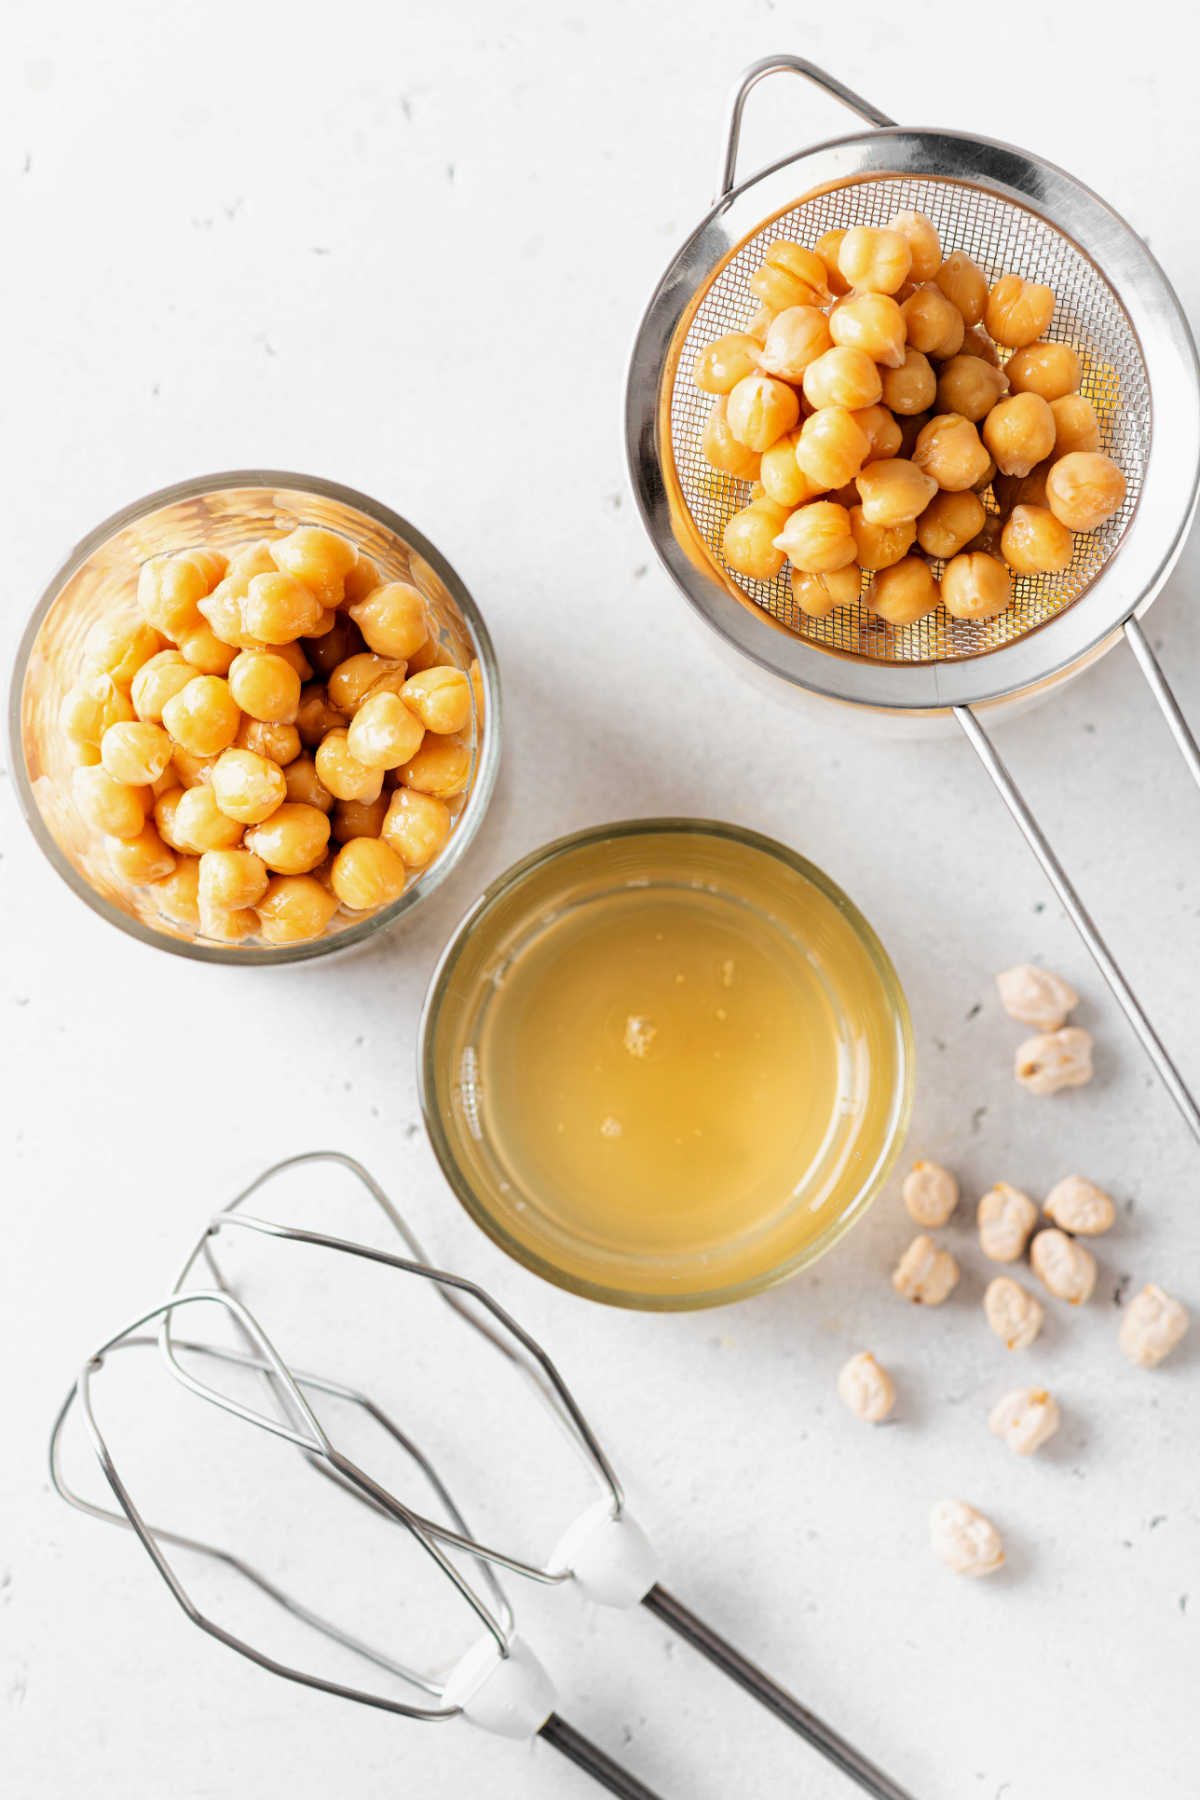 Aquafaba, dried chickpeas, cooked chickpeas and hand mixers